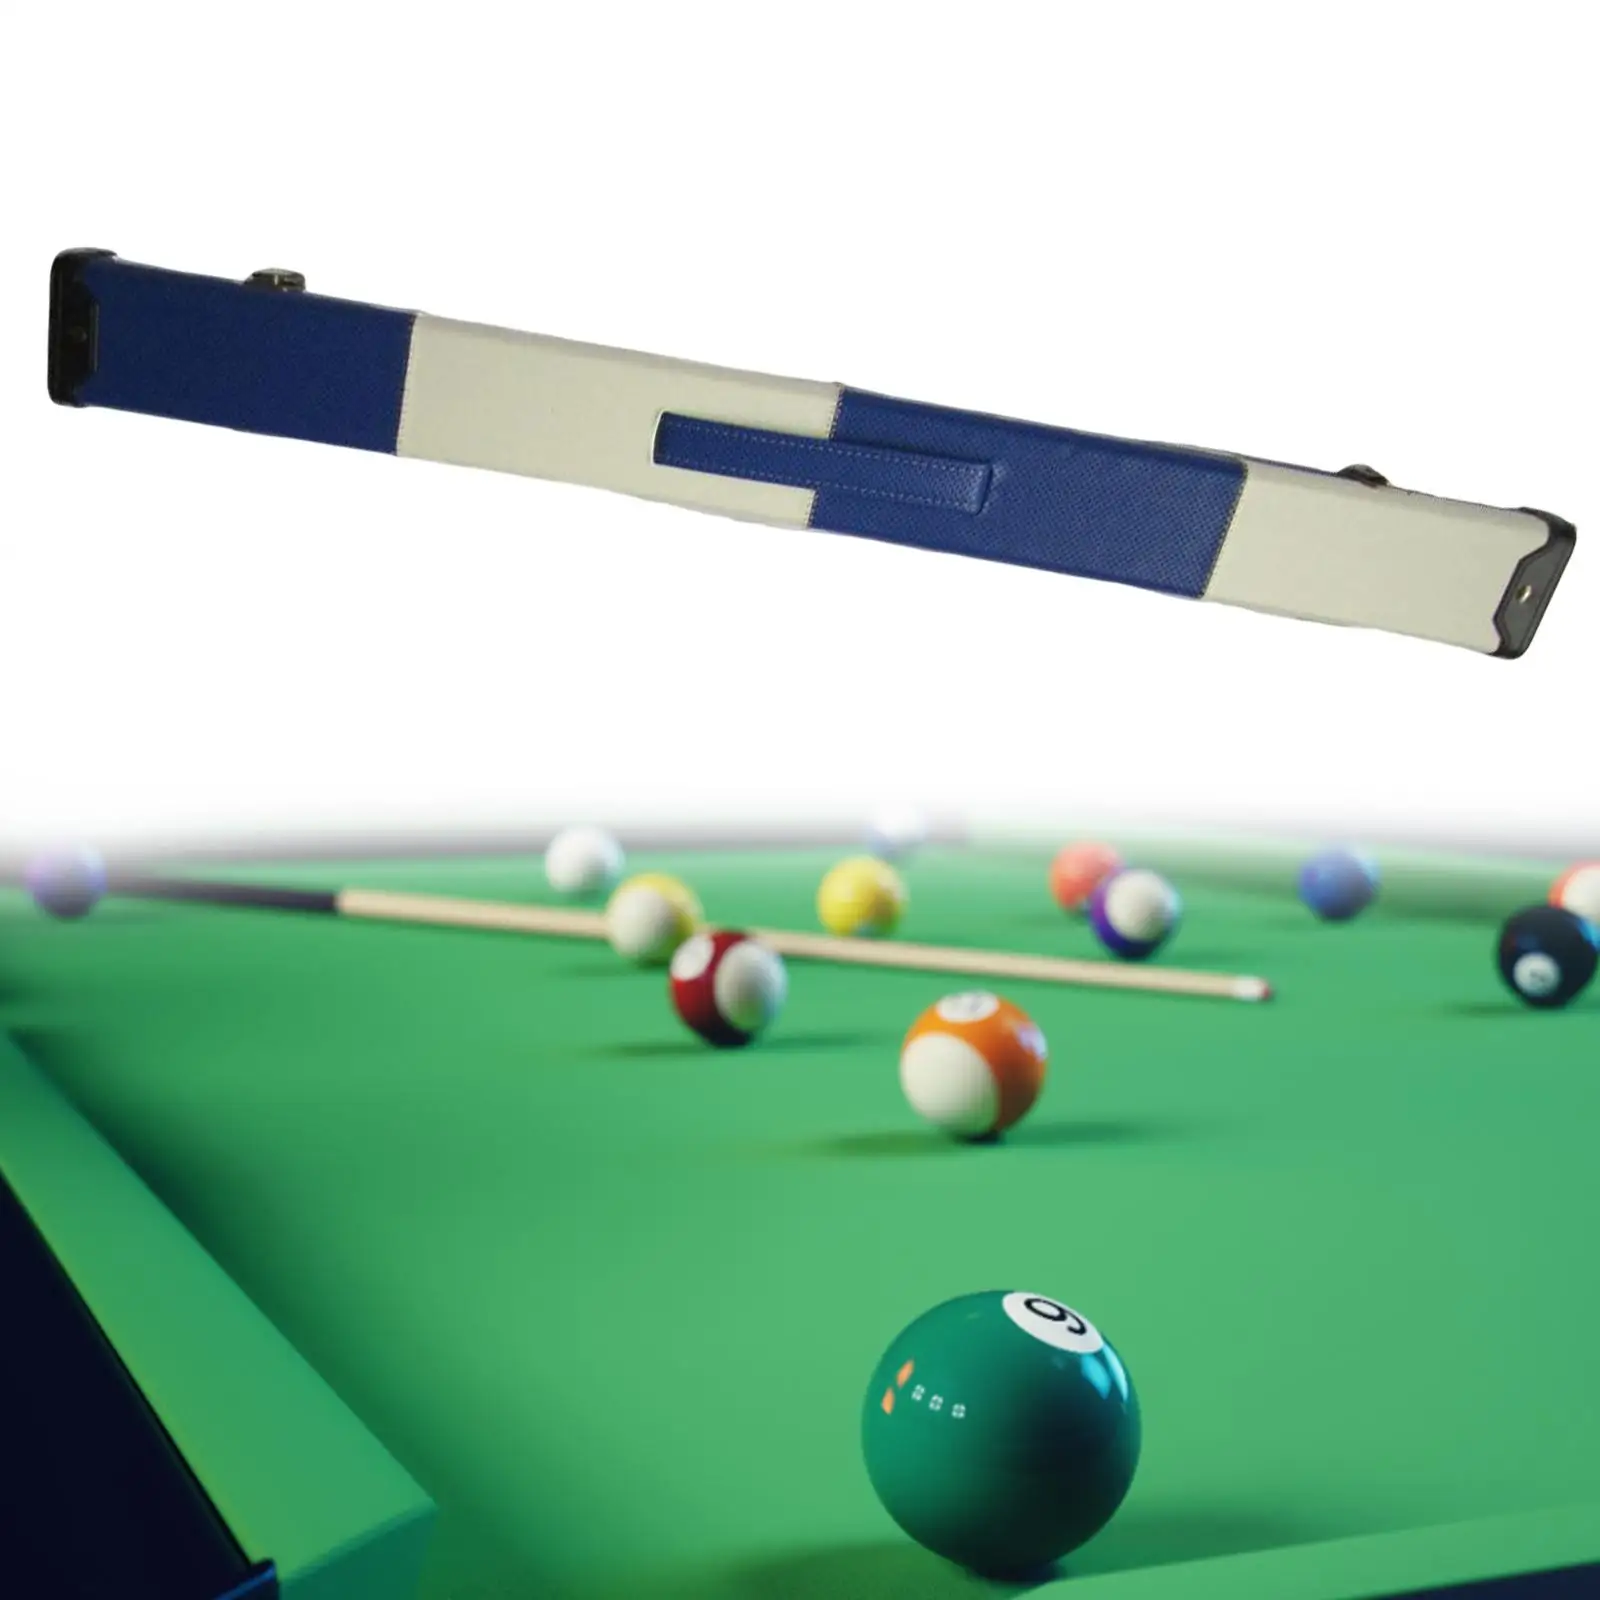 Pool Cue Rod Carrying Case Bag Protective Accessories Pouch 1/2 Billiard Carrying Holder Lightweight Durable Cover Storage Bag